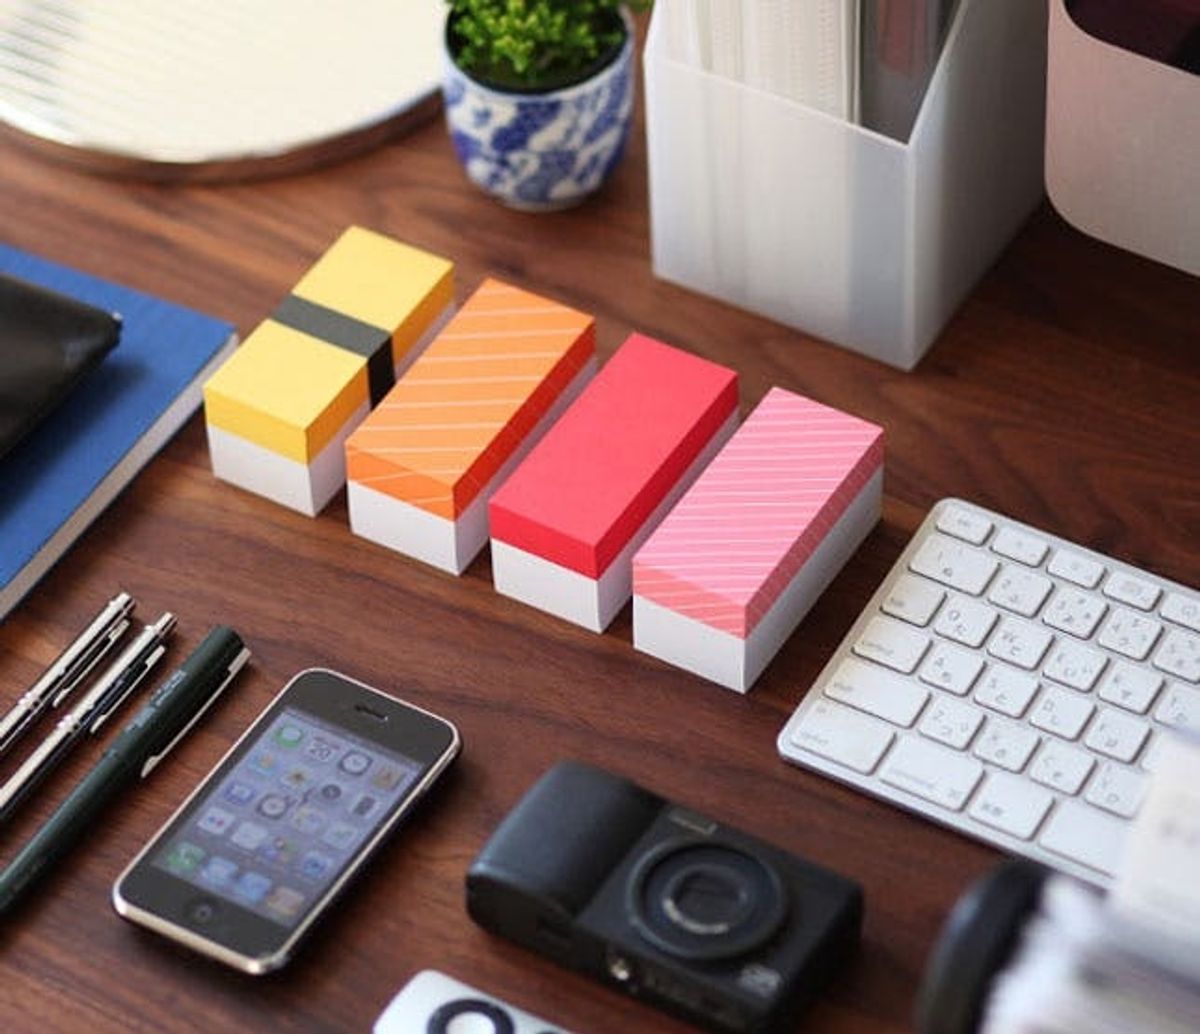 30 Ways to Keep Your Workspace Creative and Well-Organized